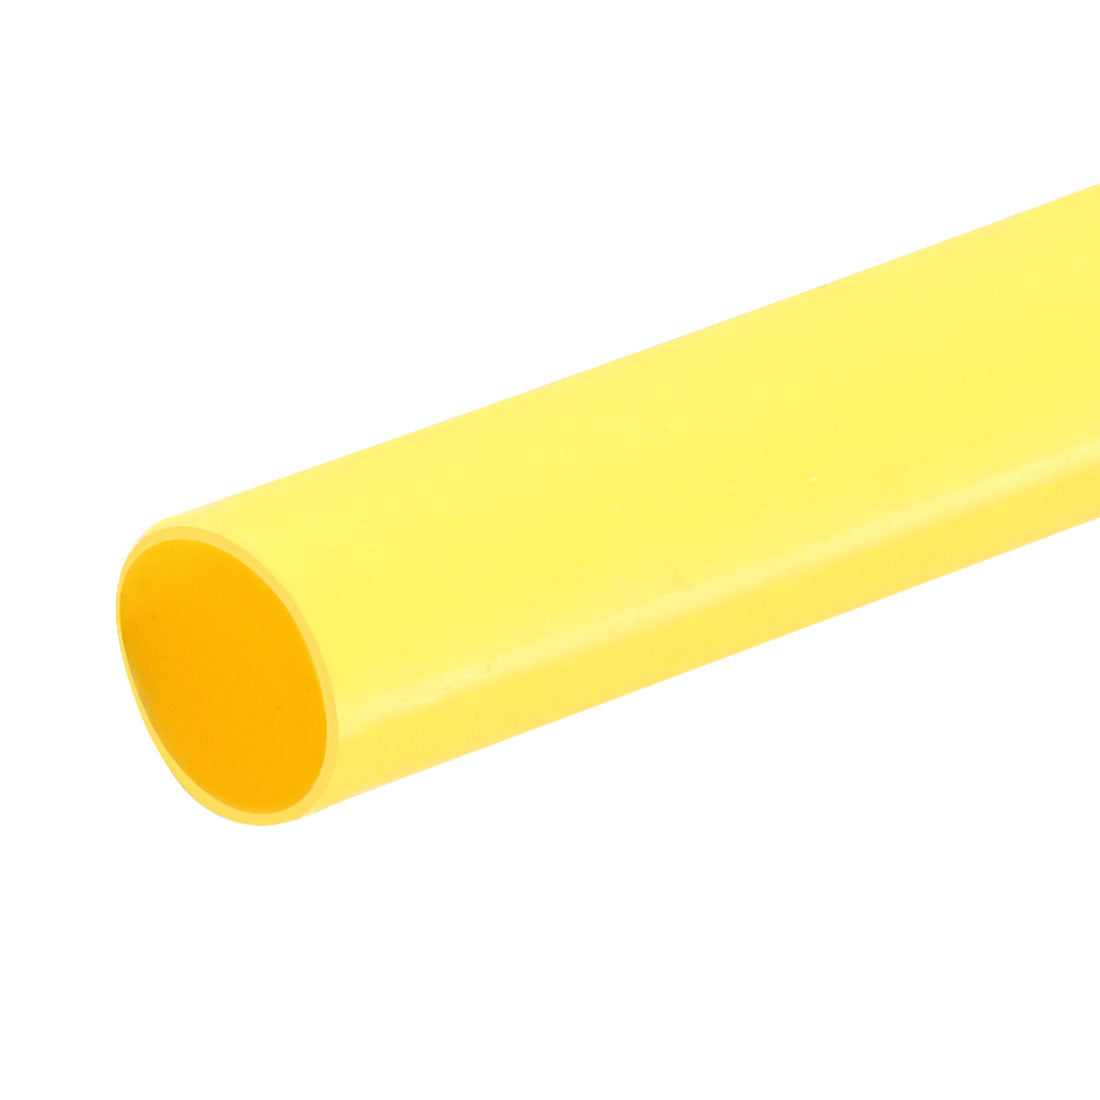 uxcell Uxcell Heat Shrink Tube 2:1 Electrical Insulation Tube Wire Cable Tubing Sleeving Wrap Yellow 4mm Diameter 1m Long